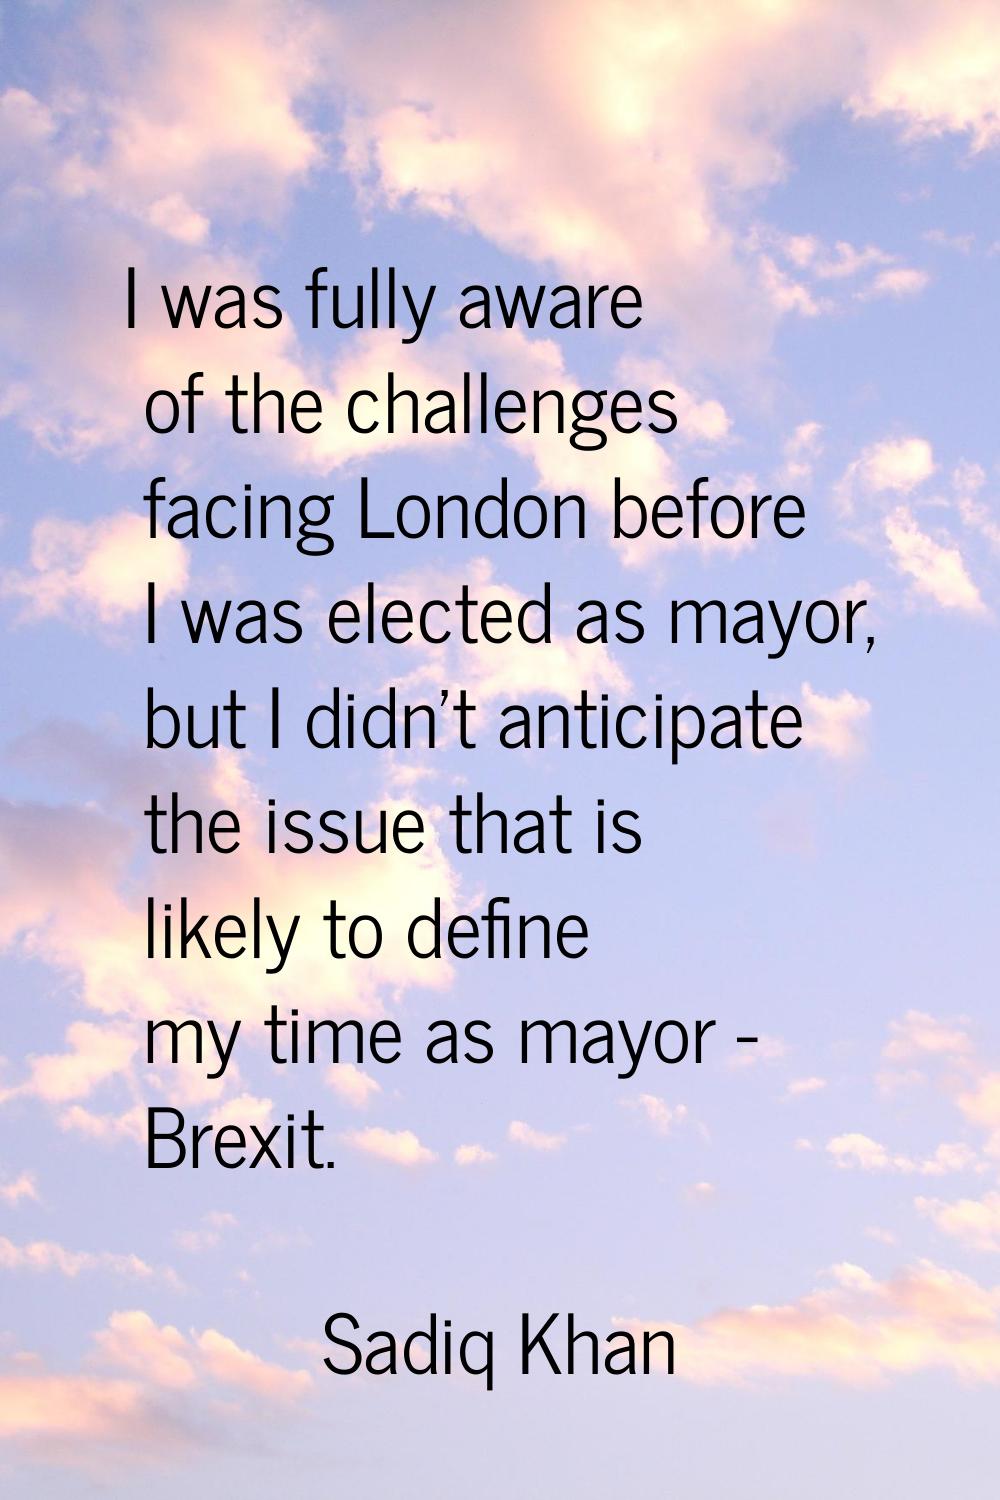 I was fully aware of the challenges facing London before I was elected as mayor, but I didn't antic